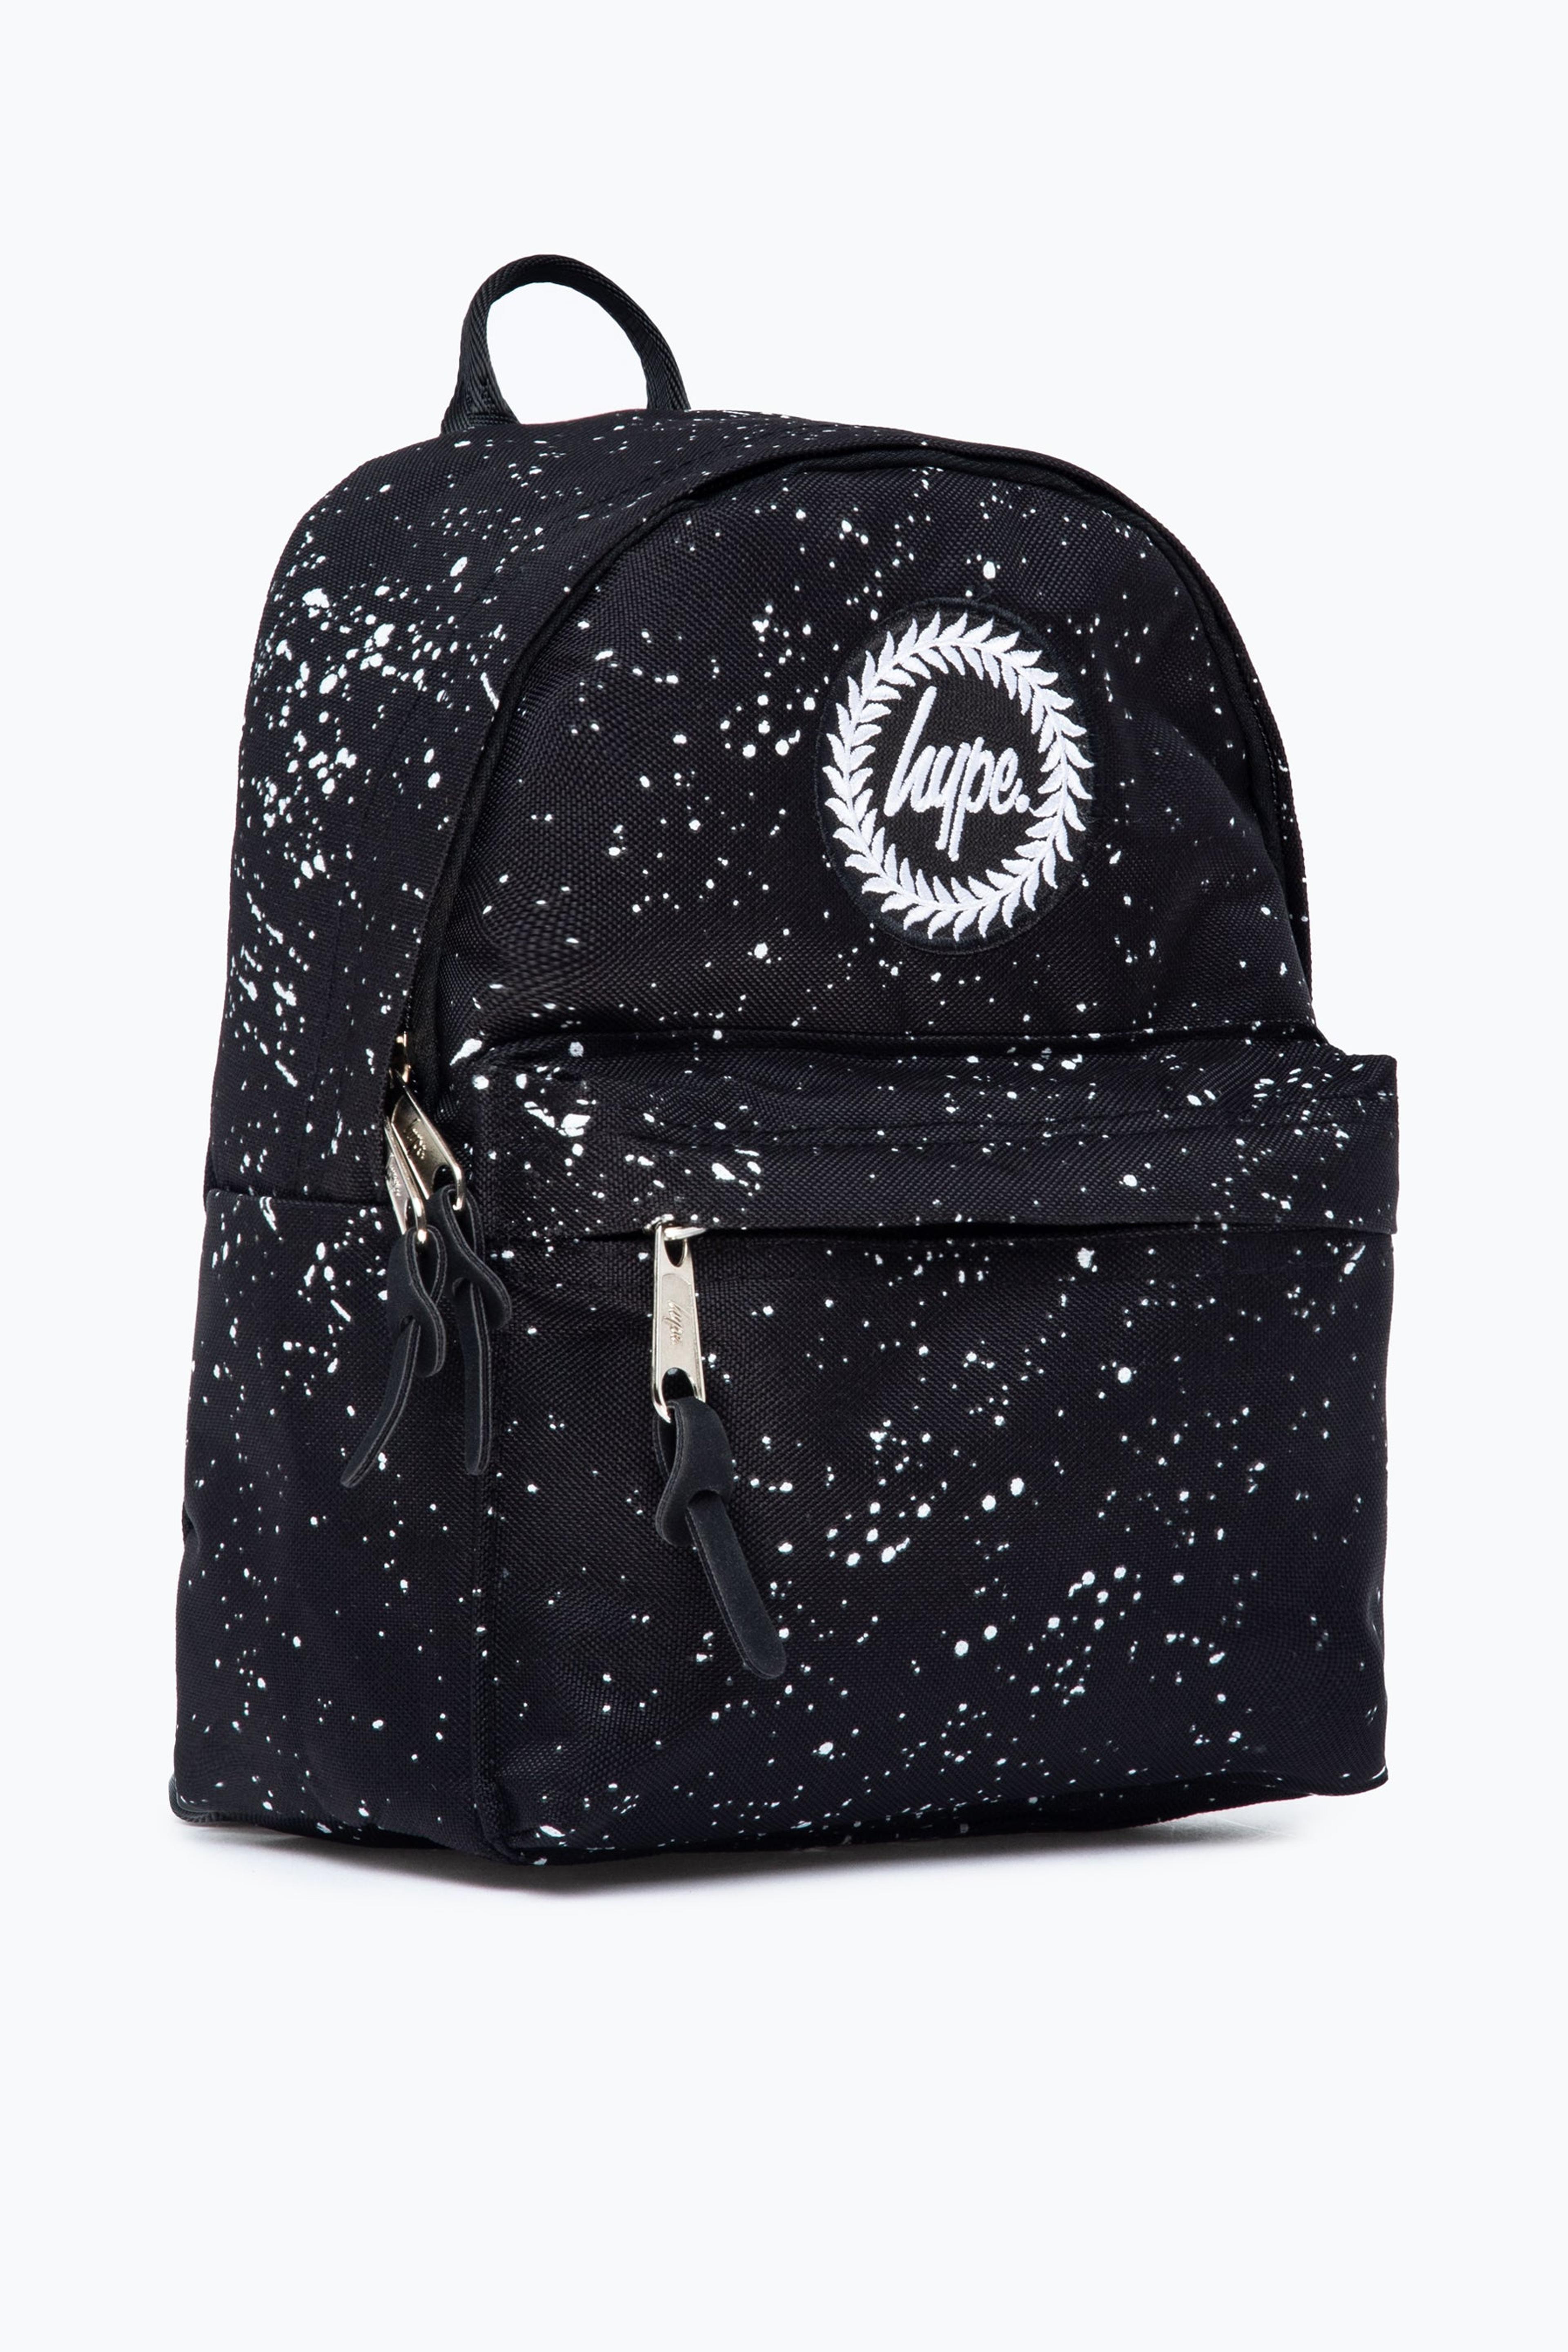 Alternate View 1 of HYPE BLACK SPECKLE MINI BACKPACK